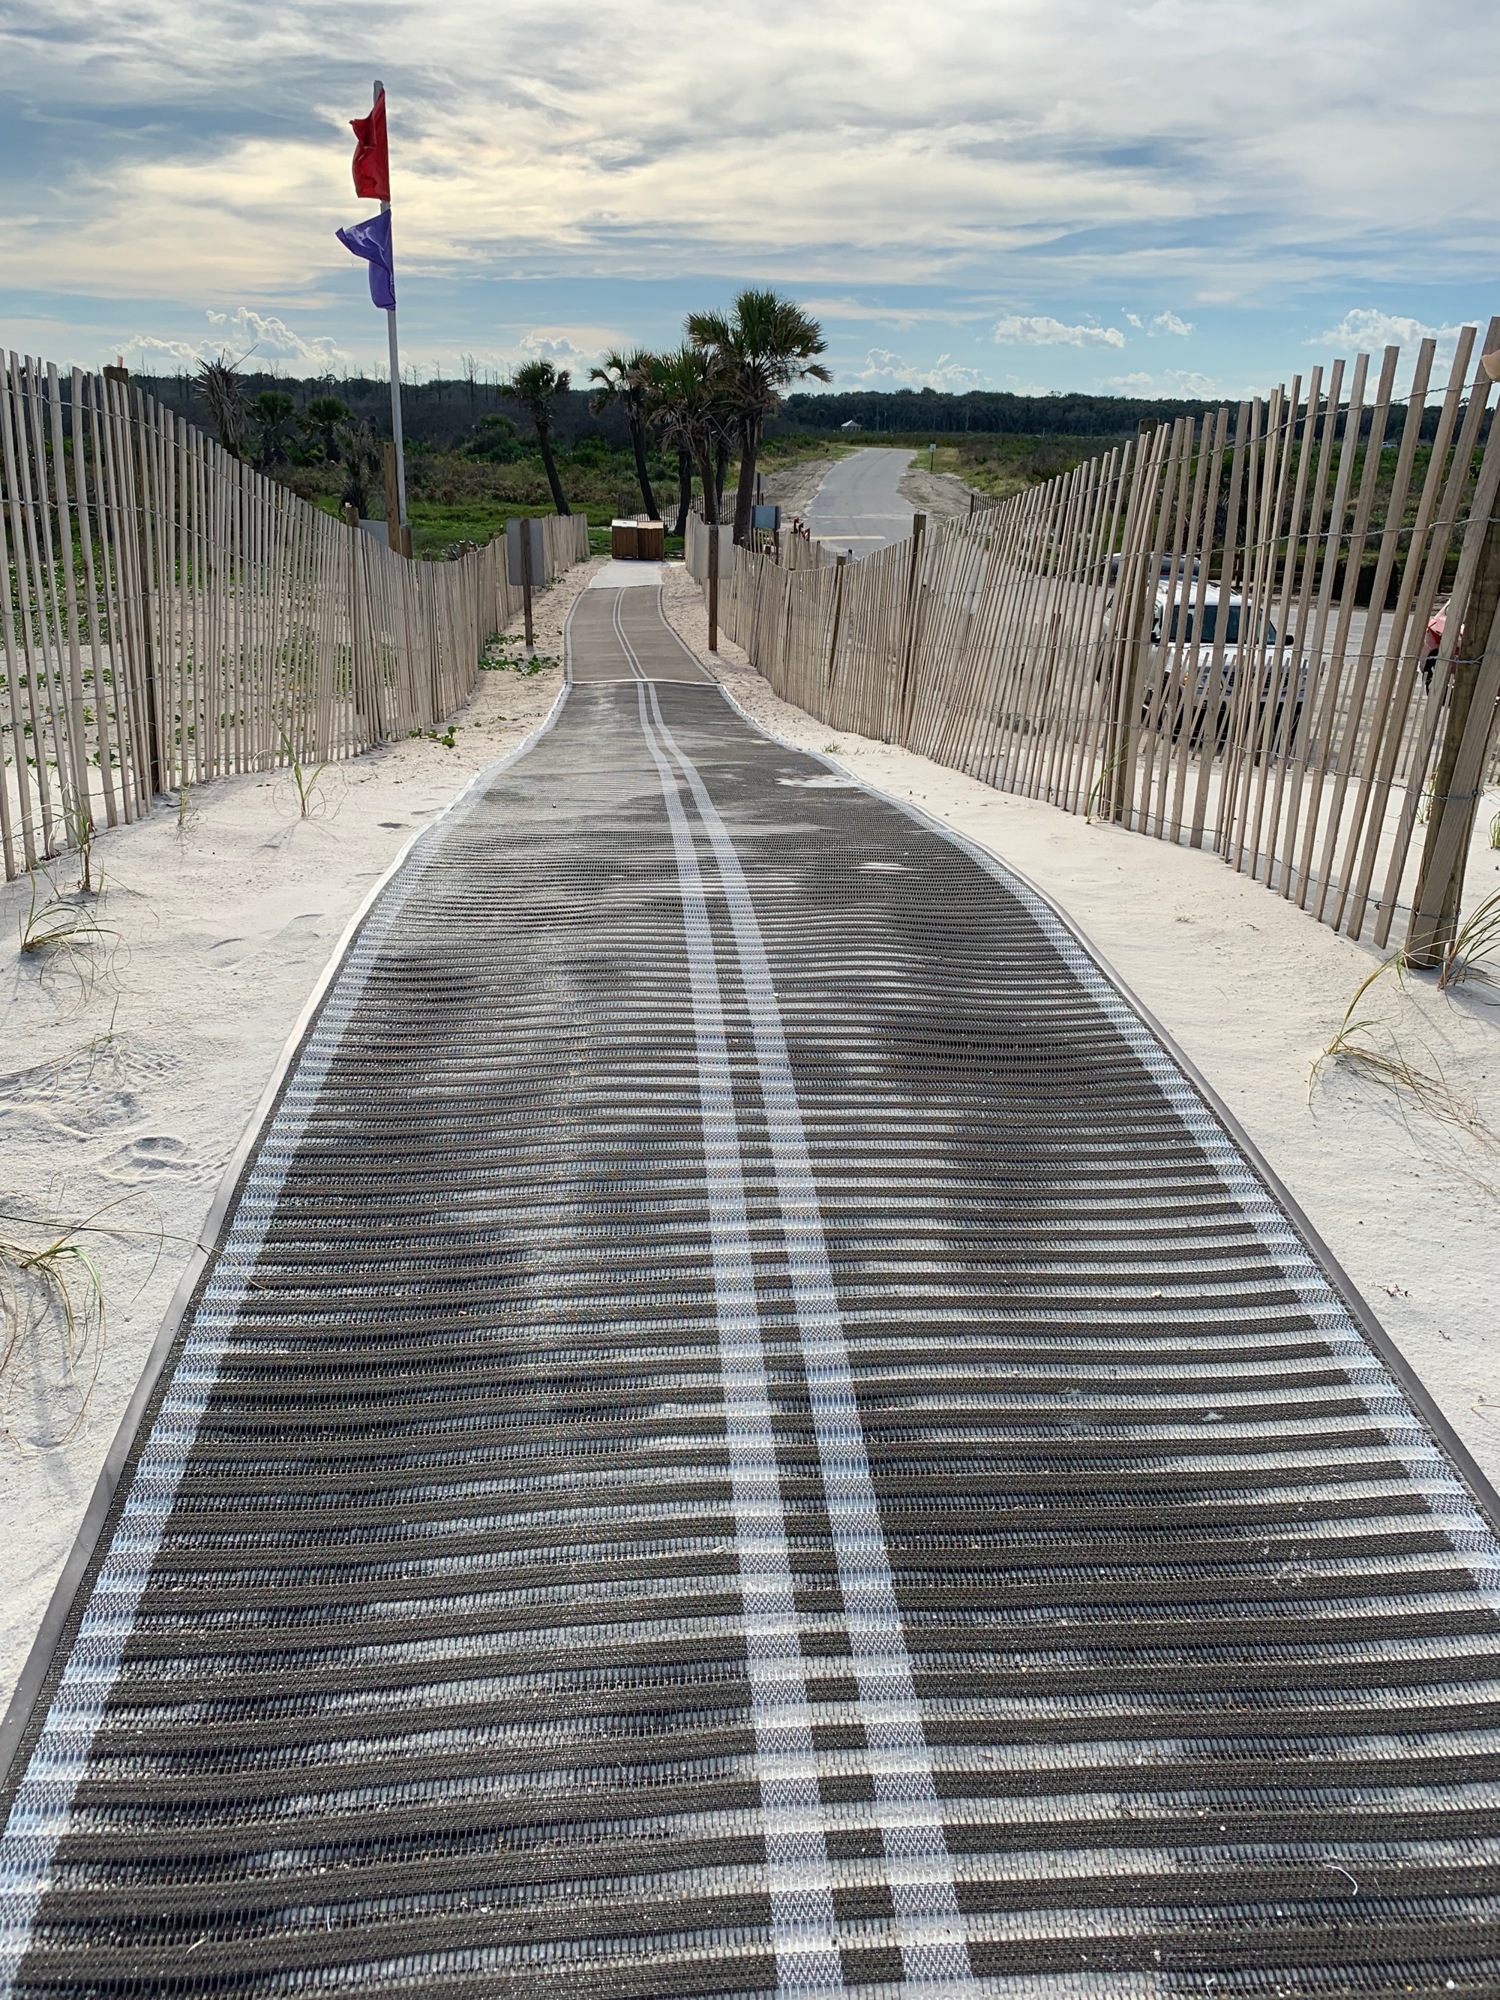 Mobi-Mats provide a low-impact path over the dunes, instead of a wooden structure.